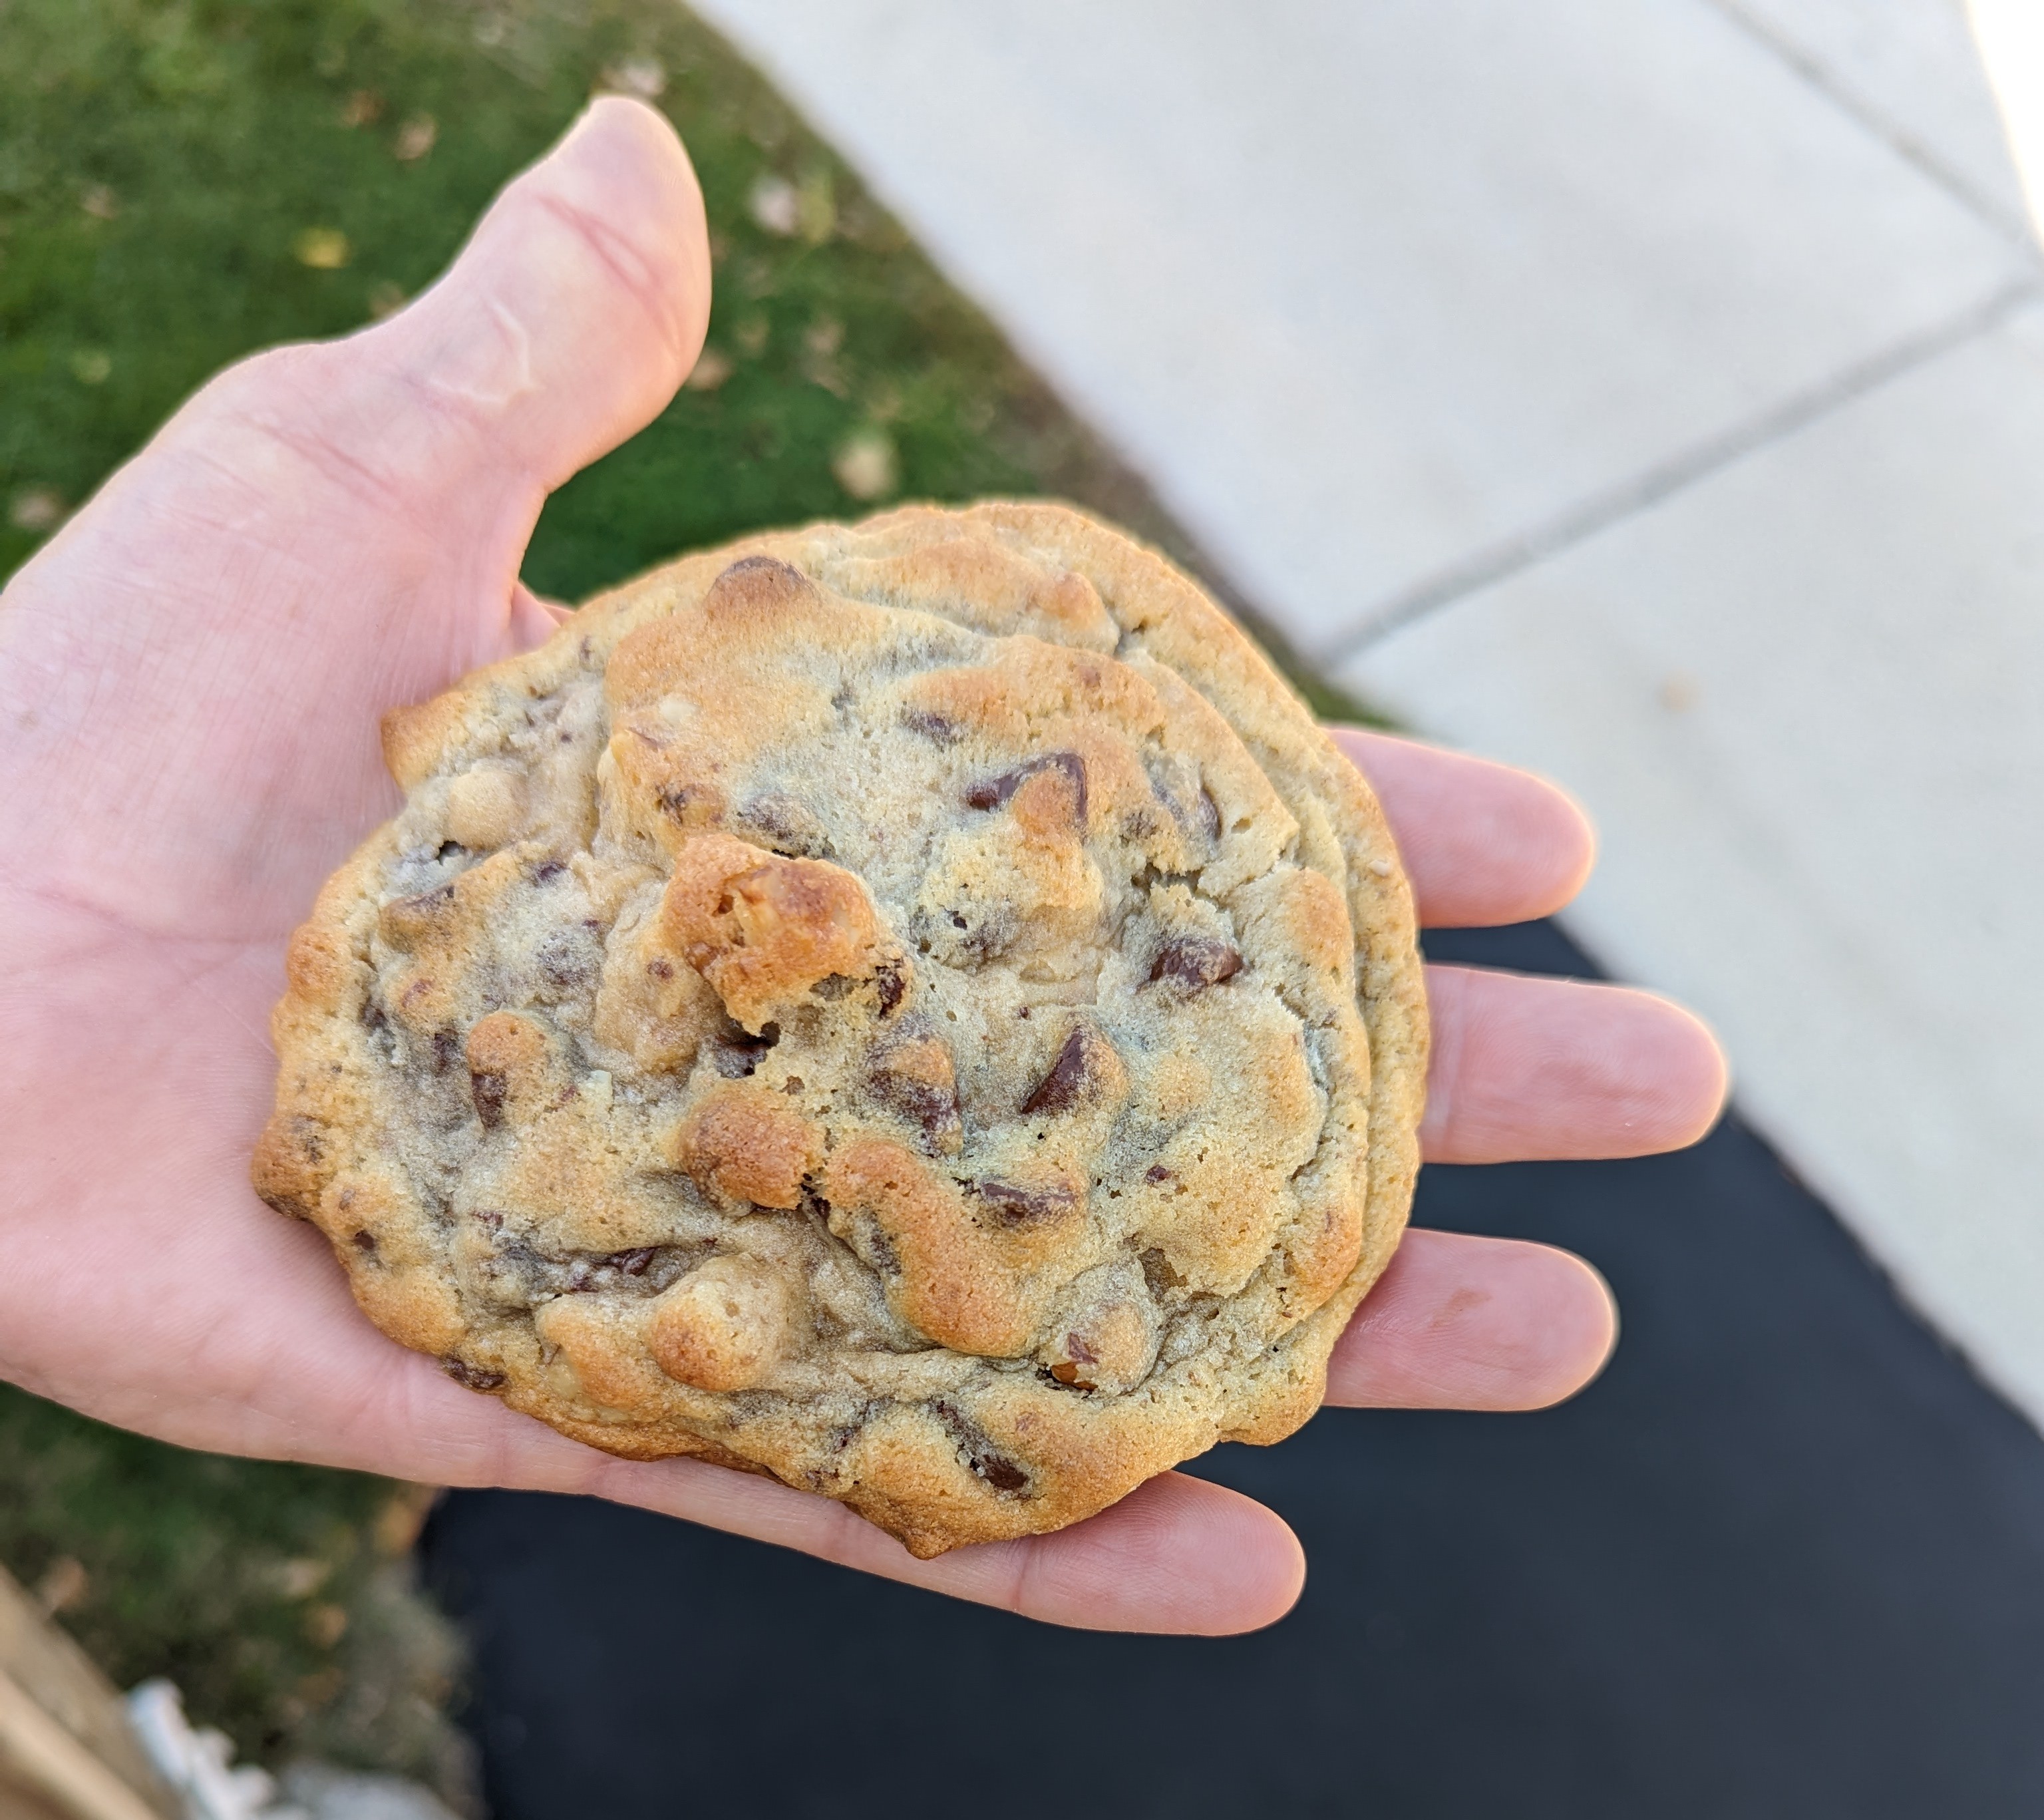 This Donna's Giant Cookies is made with love by What A Delightful Treat! Shop more unique gift ideas today with Spots Initiatives, the best way to support creators.